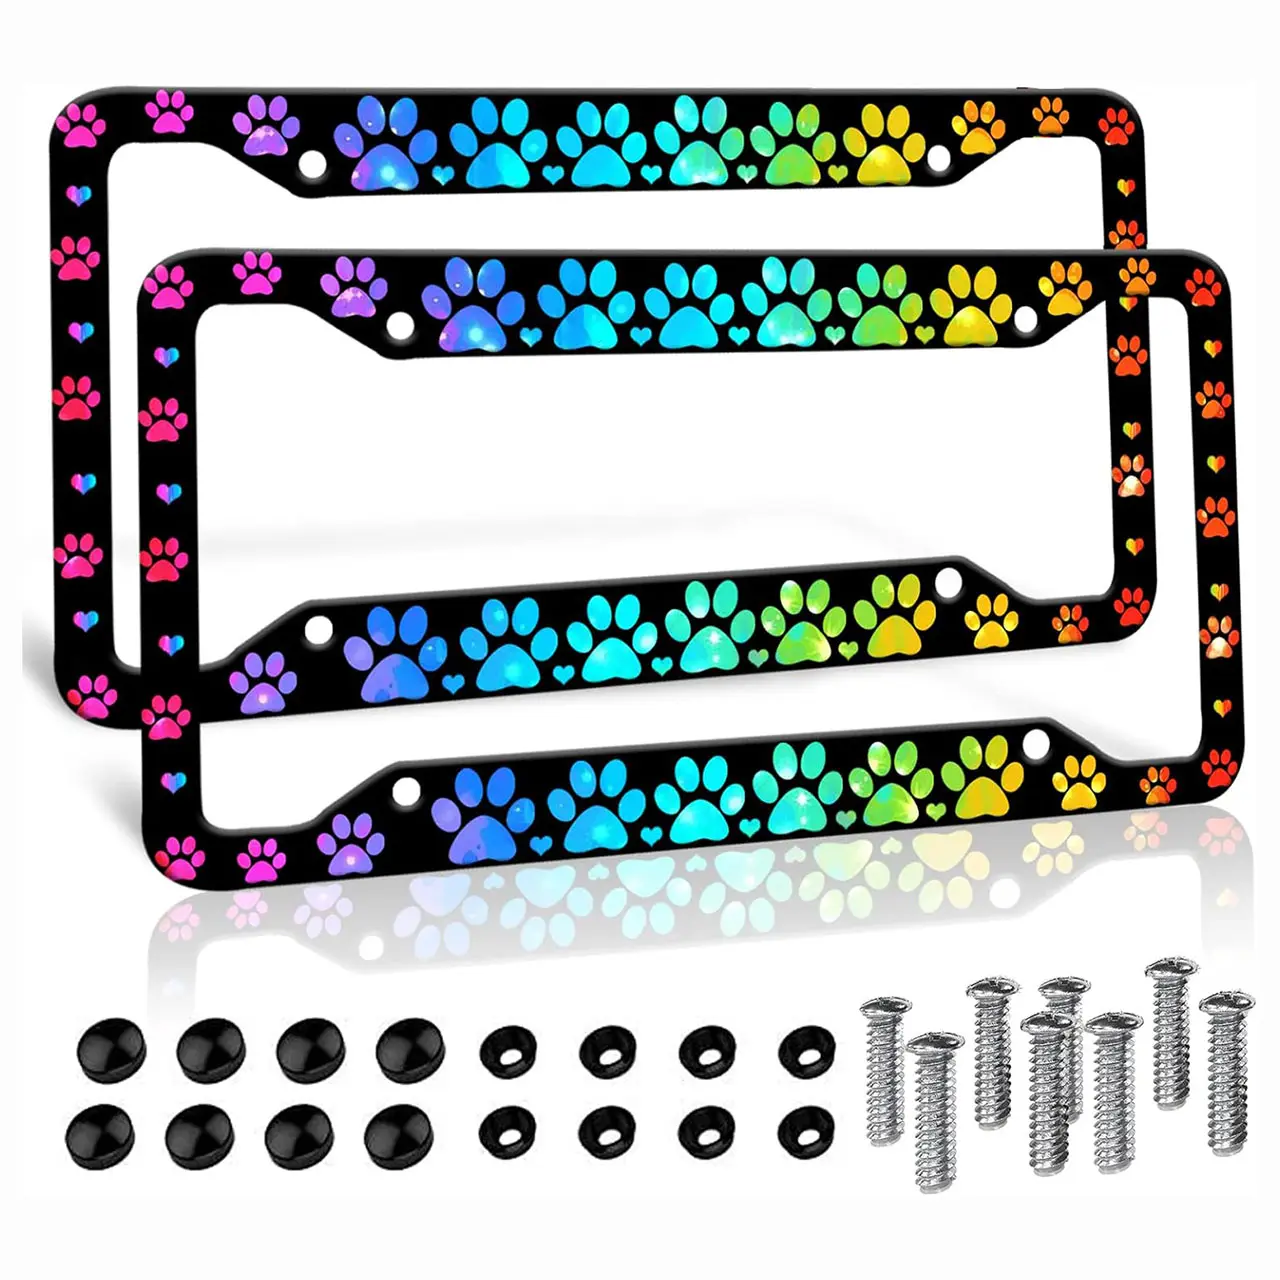 License Plate Frames Dog Paw Print License Plate Covers Aluminum Metal License Plate Holder Cute Funny Decorative Car Tag Frame